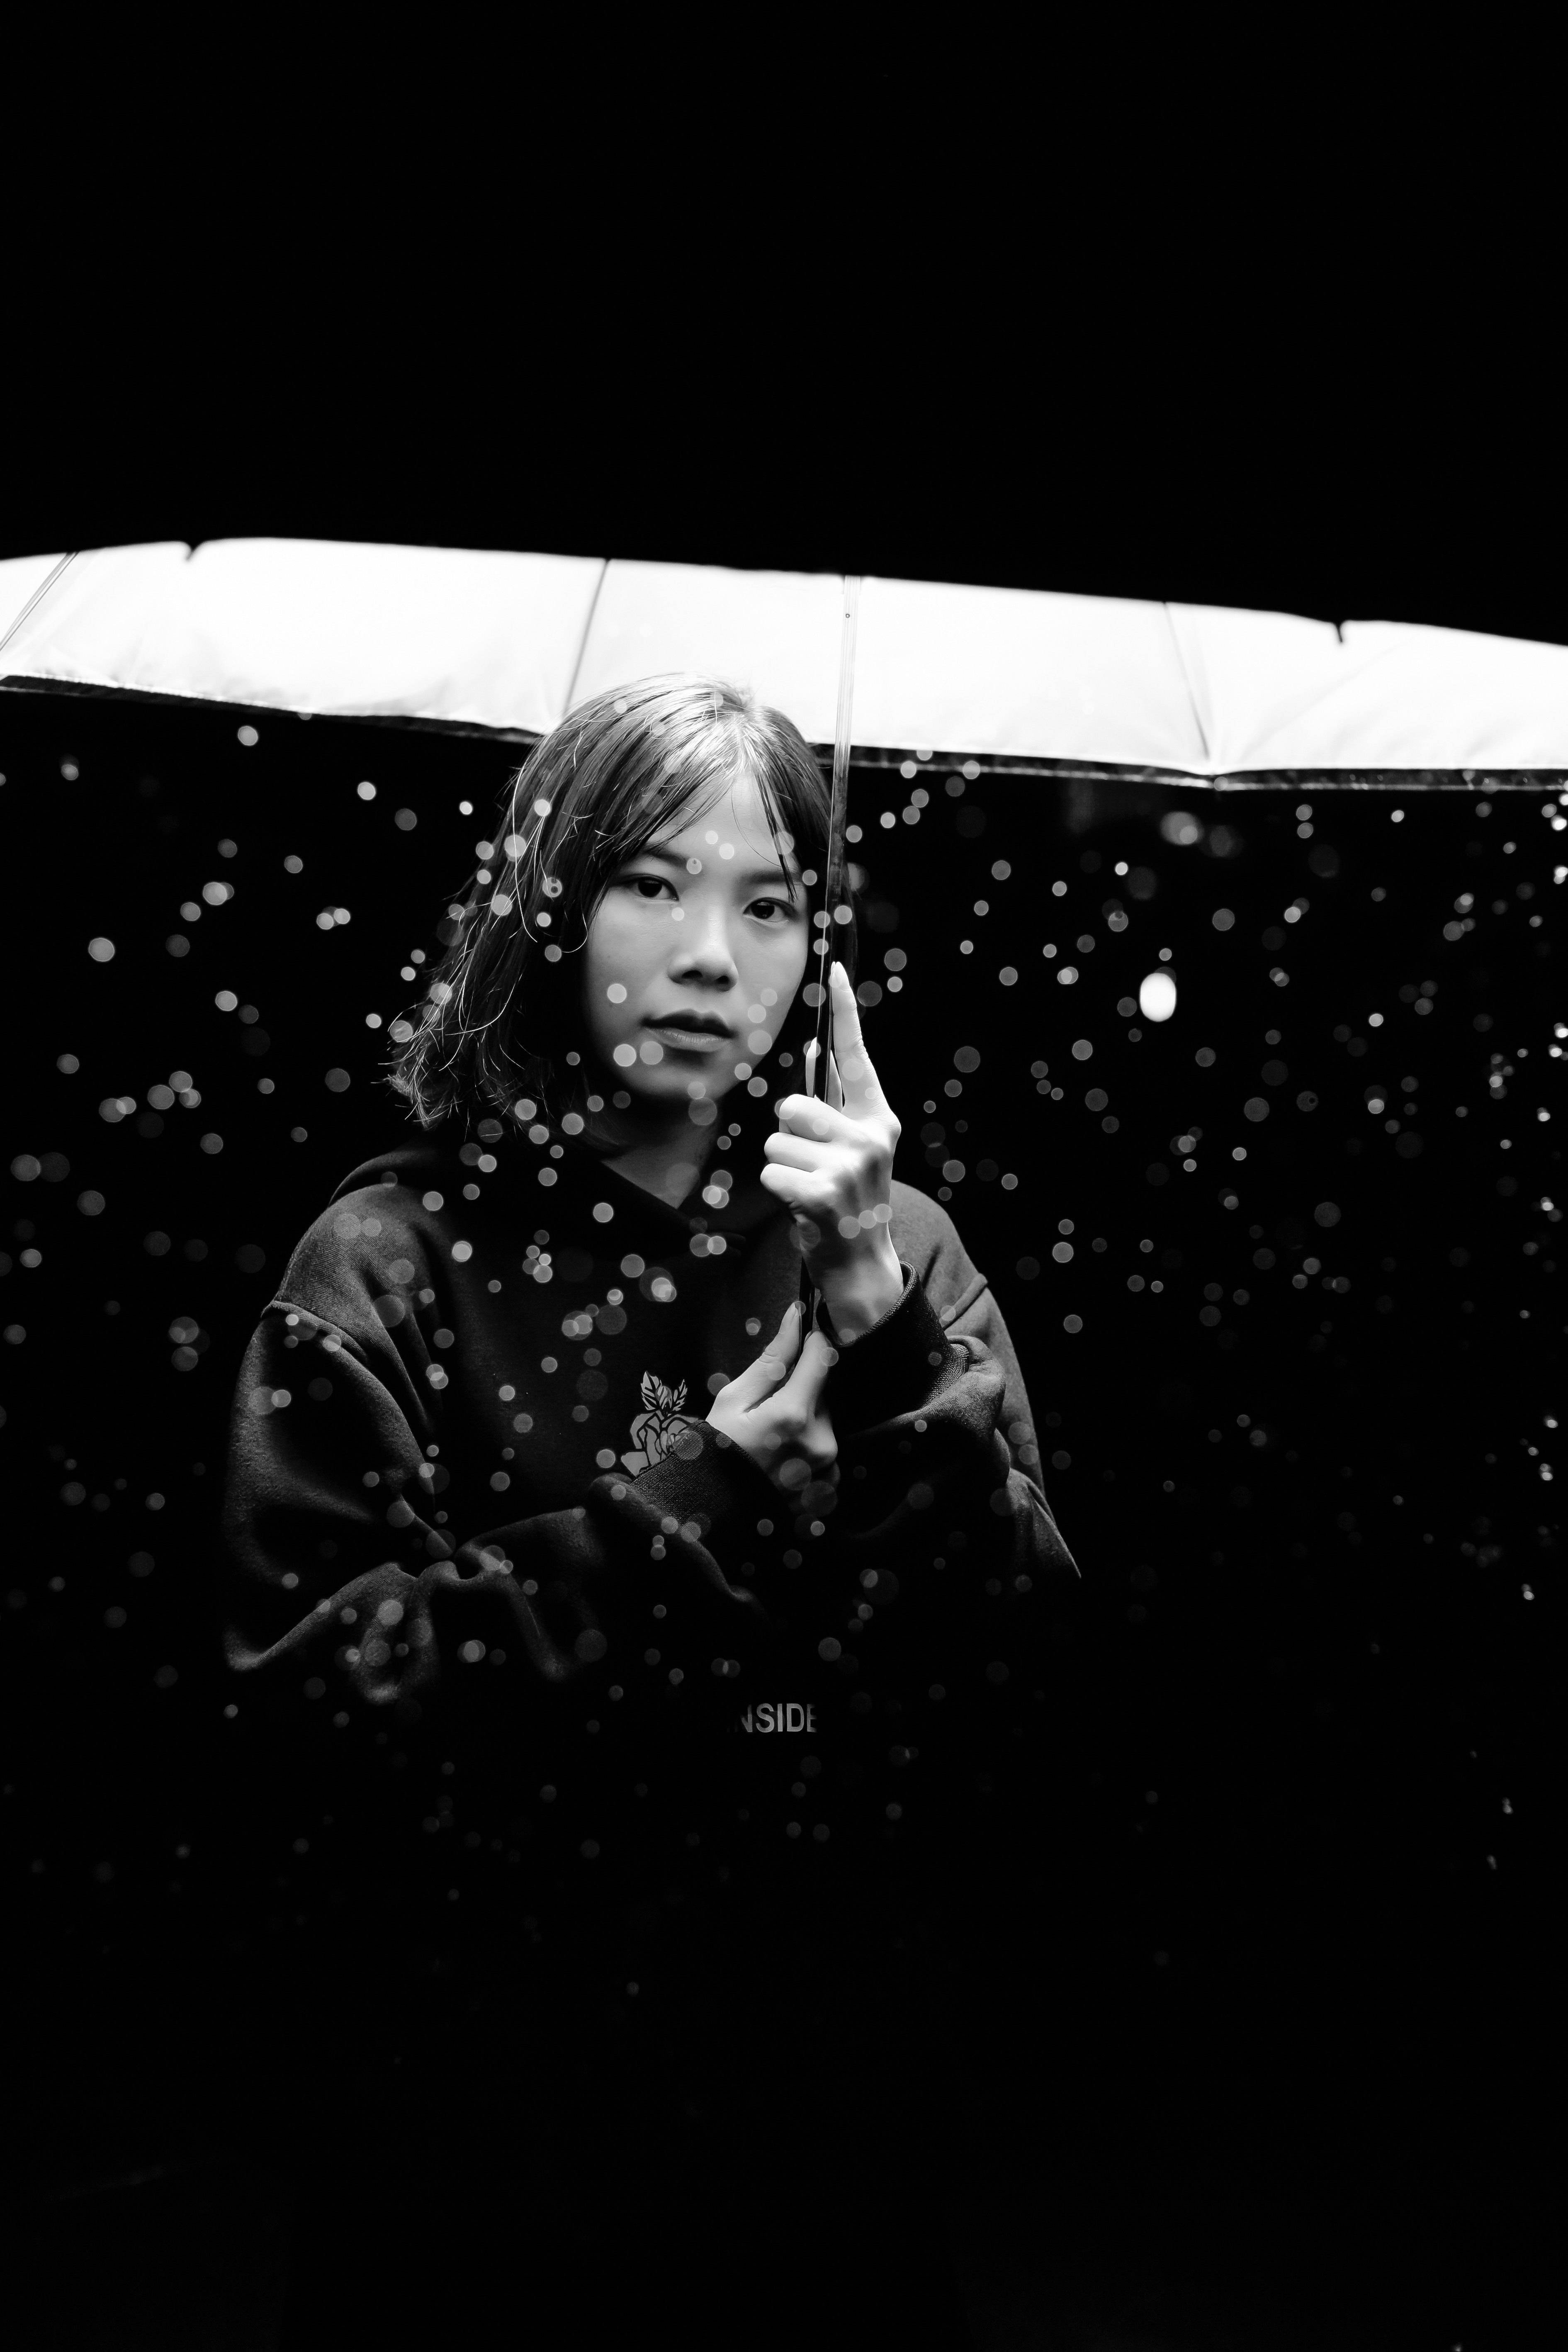 Black and white photography of a woman holding an umbrella